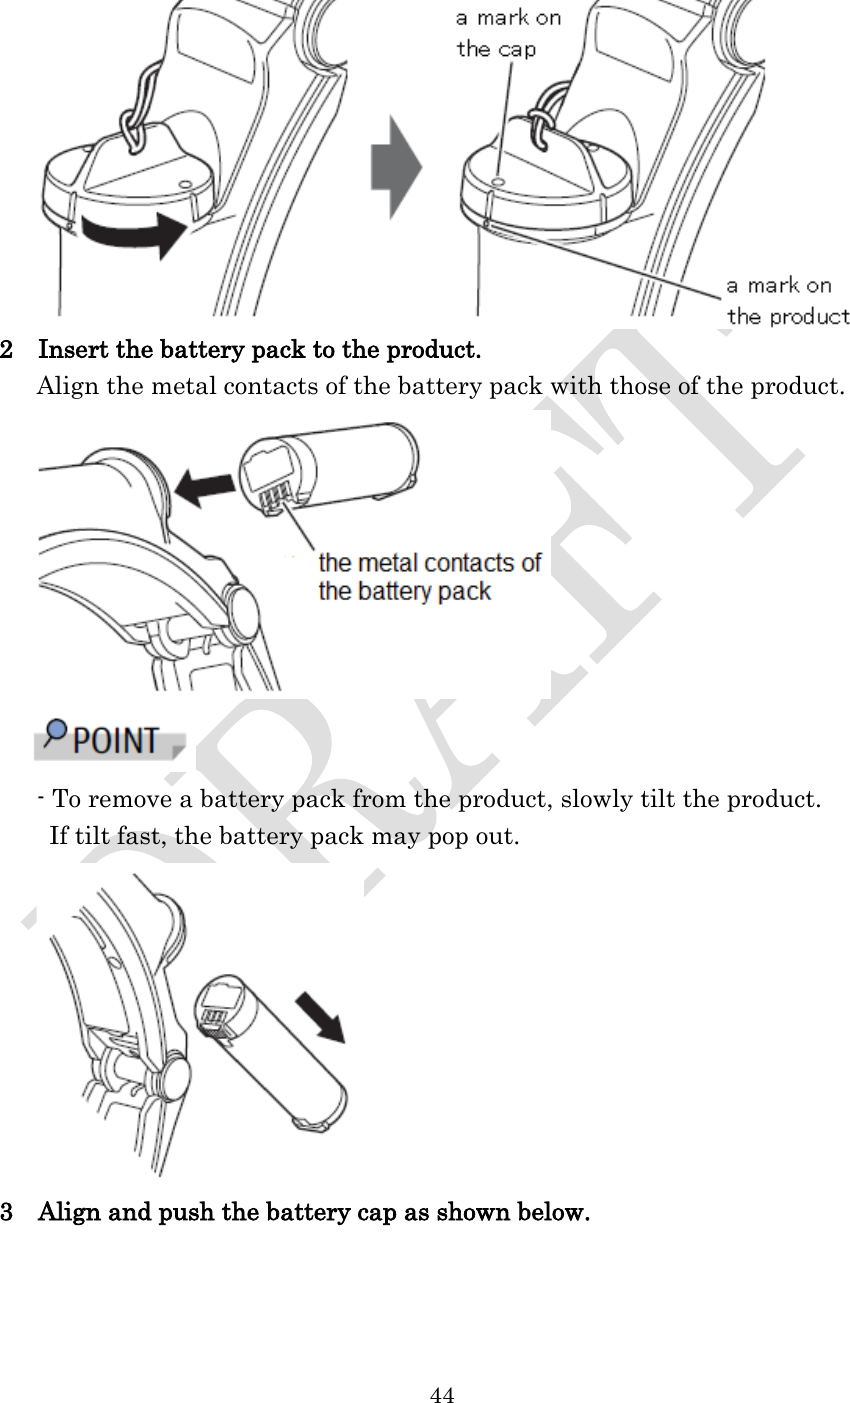  44   2  Insert the battery pack to the product.    Align the metal contacts of the battery pack with those of the product.   - To remove a battery pack from the product, slowly tilt the product. If tilt fast, the battery pack may pop out.  3  Align and push the battery cap as shown below. 